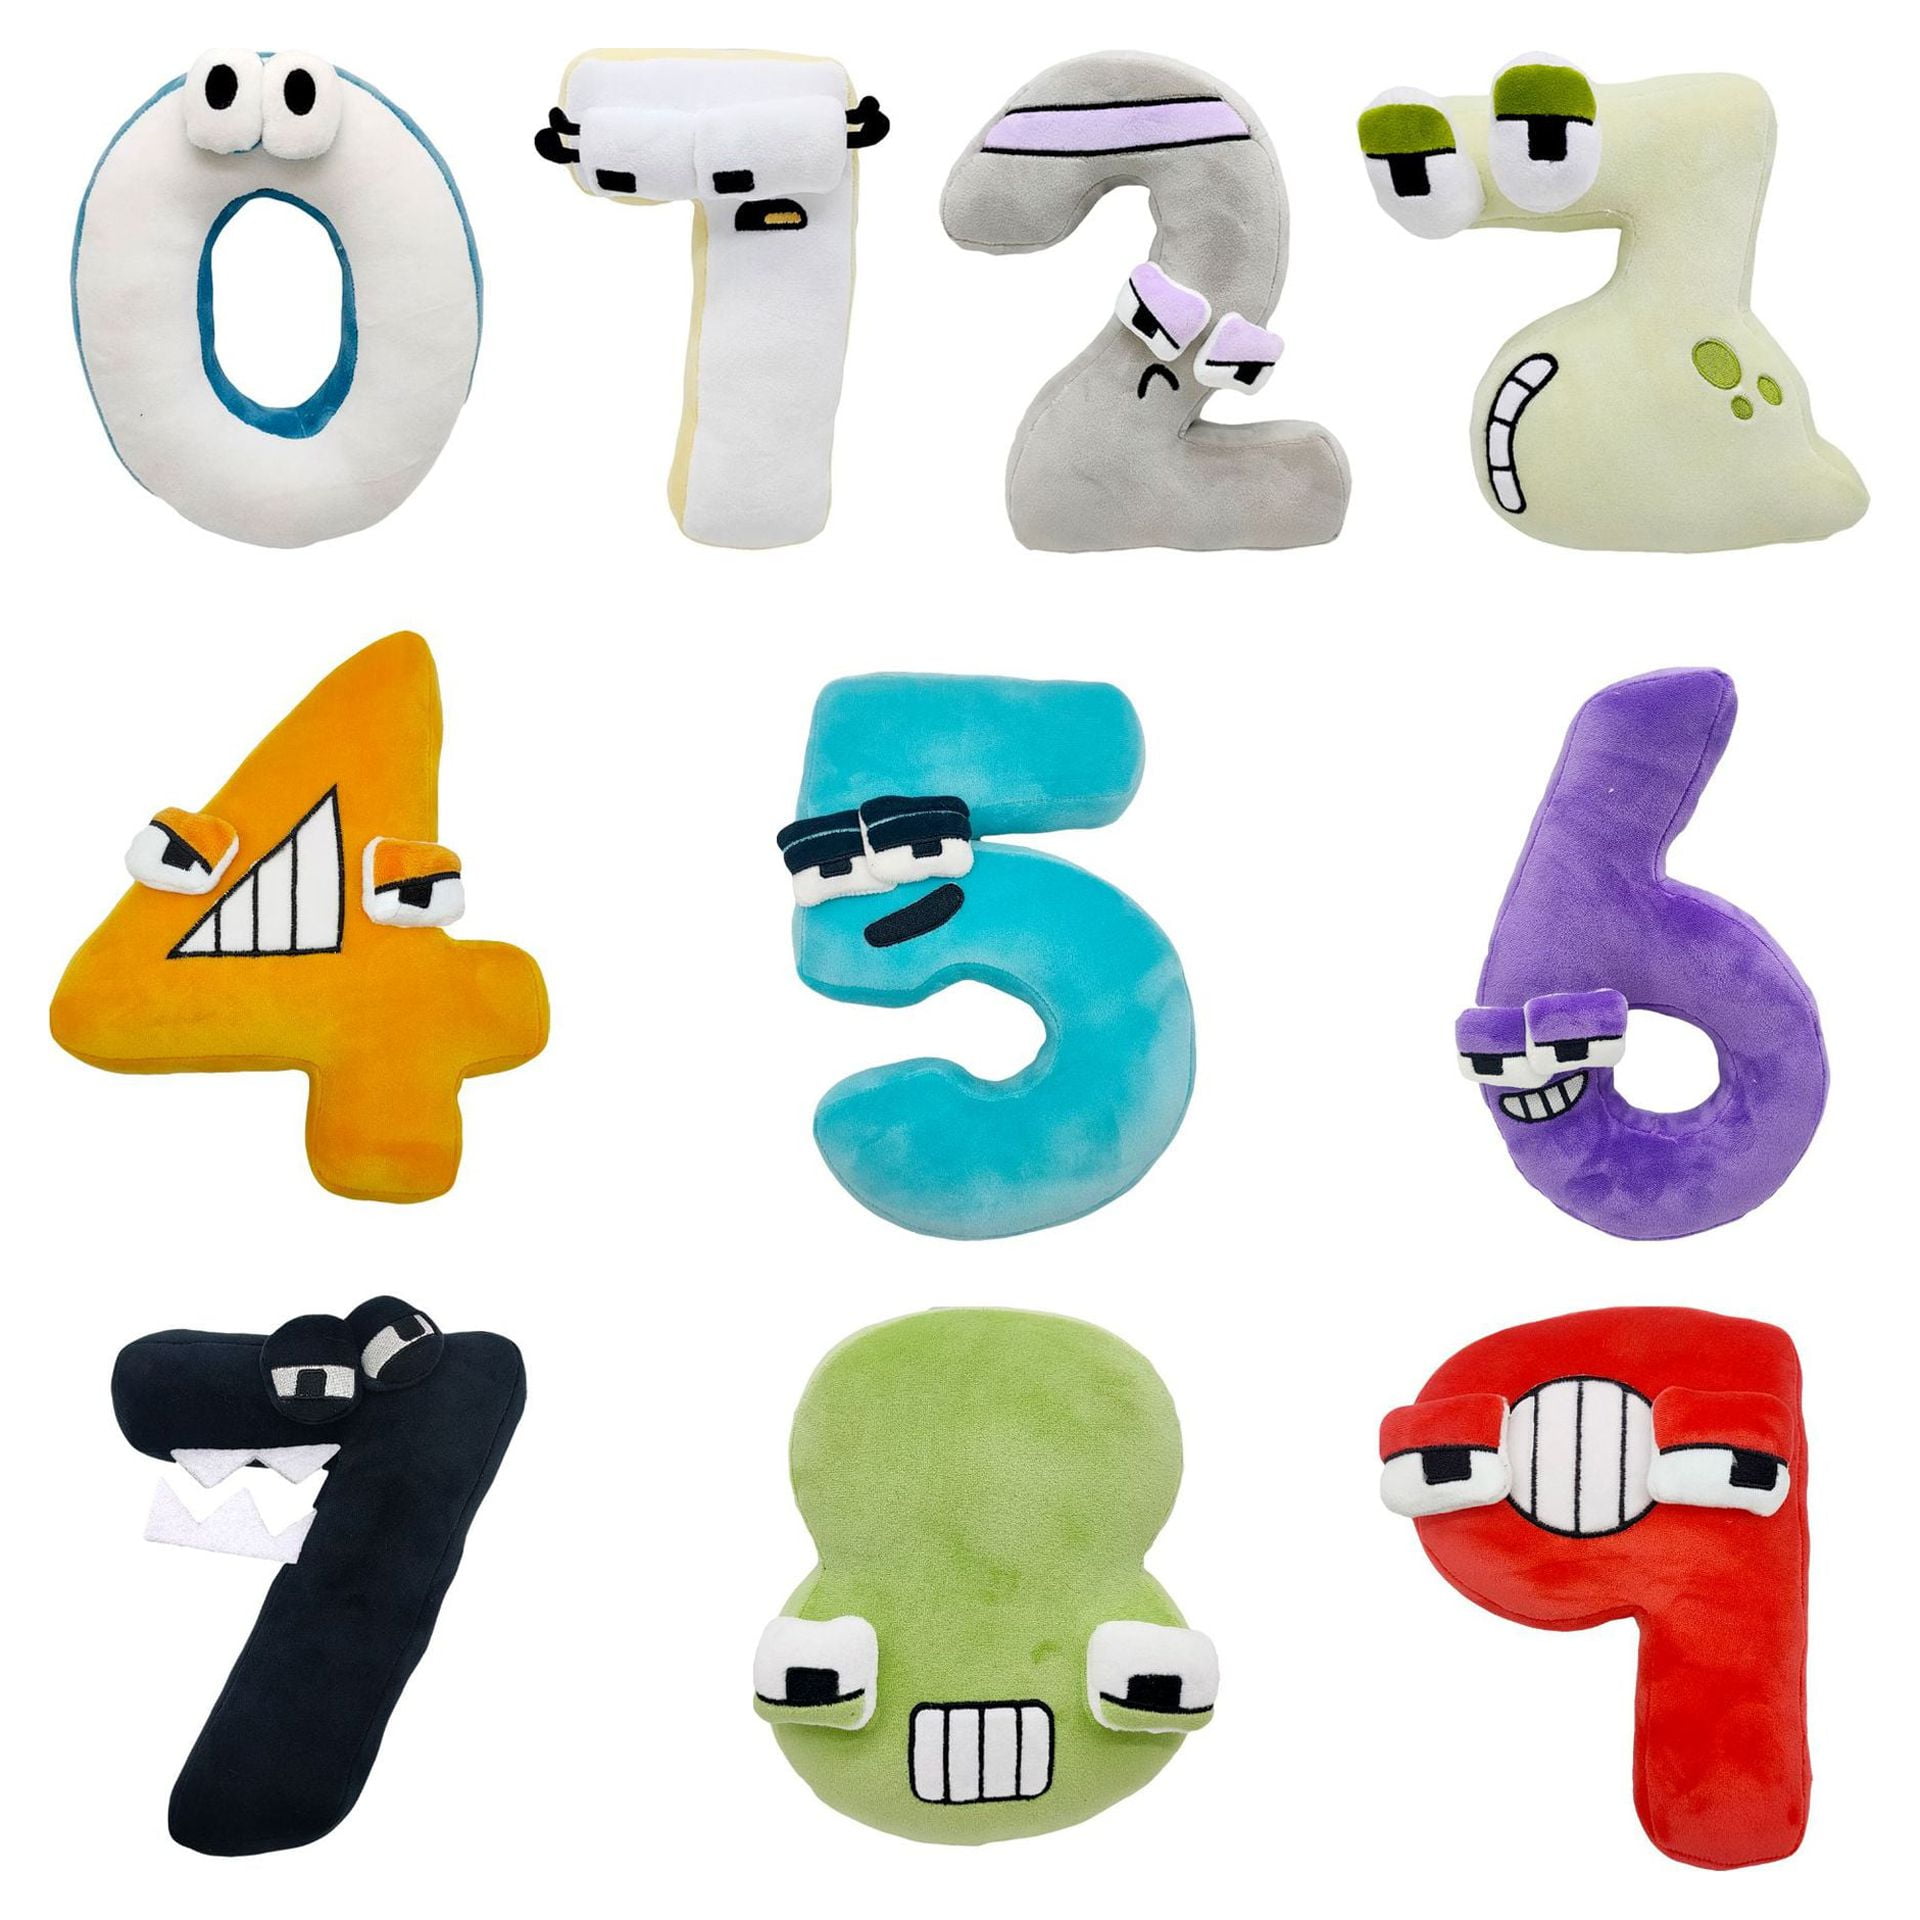  Maomoto 10pcs Number Lore Plush 0 to 9 Alphabet Lore Plush  Animal Toys All Fun Stuffed Alphabet Lore Plush Figure Suitable for Gift  Giving Fans : Toys & Games